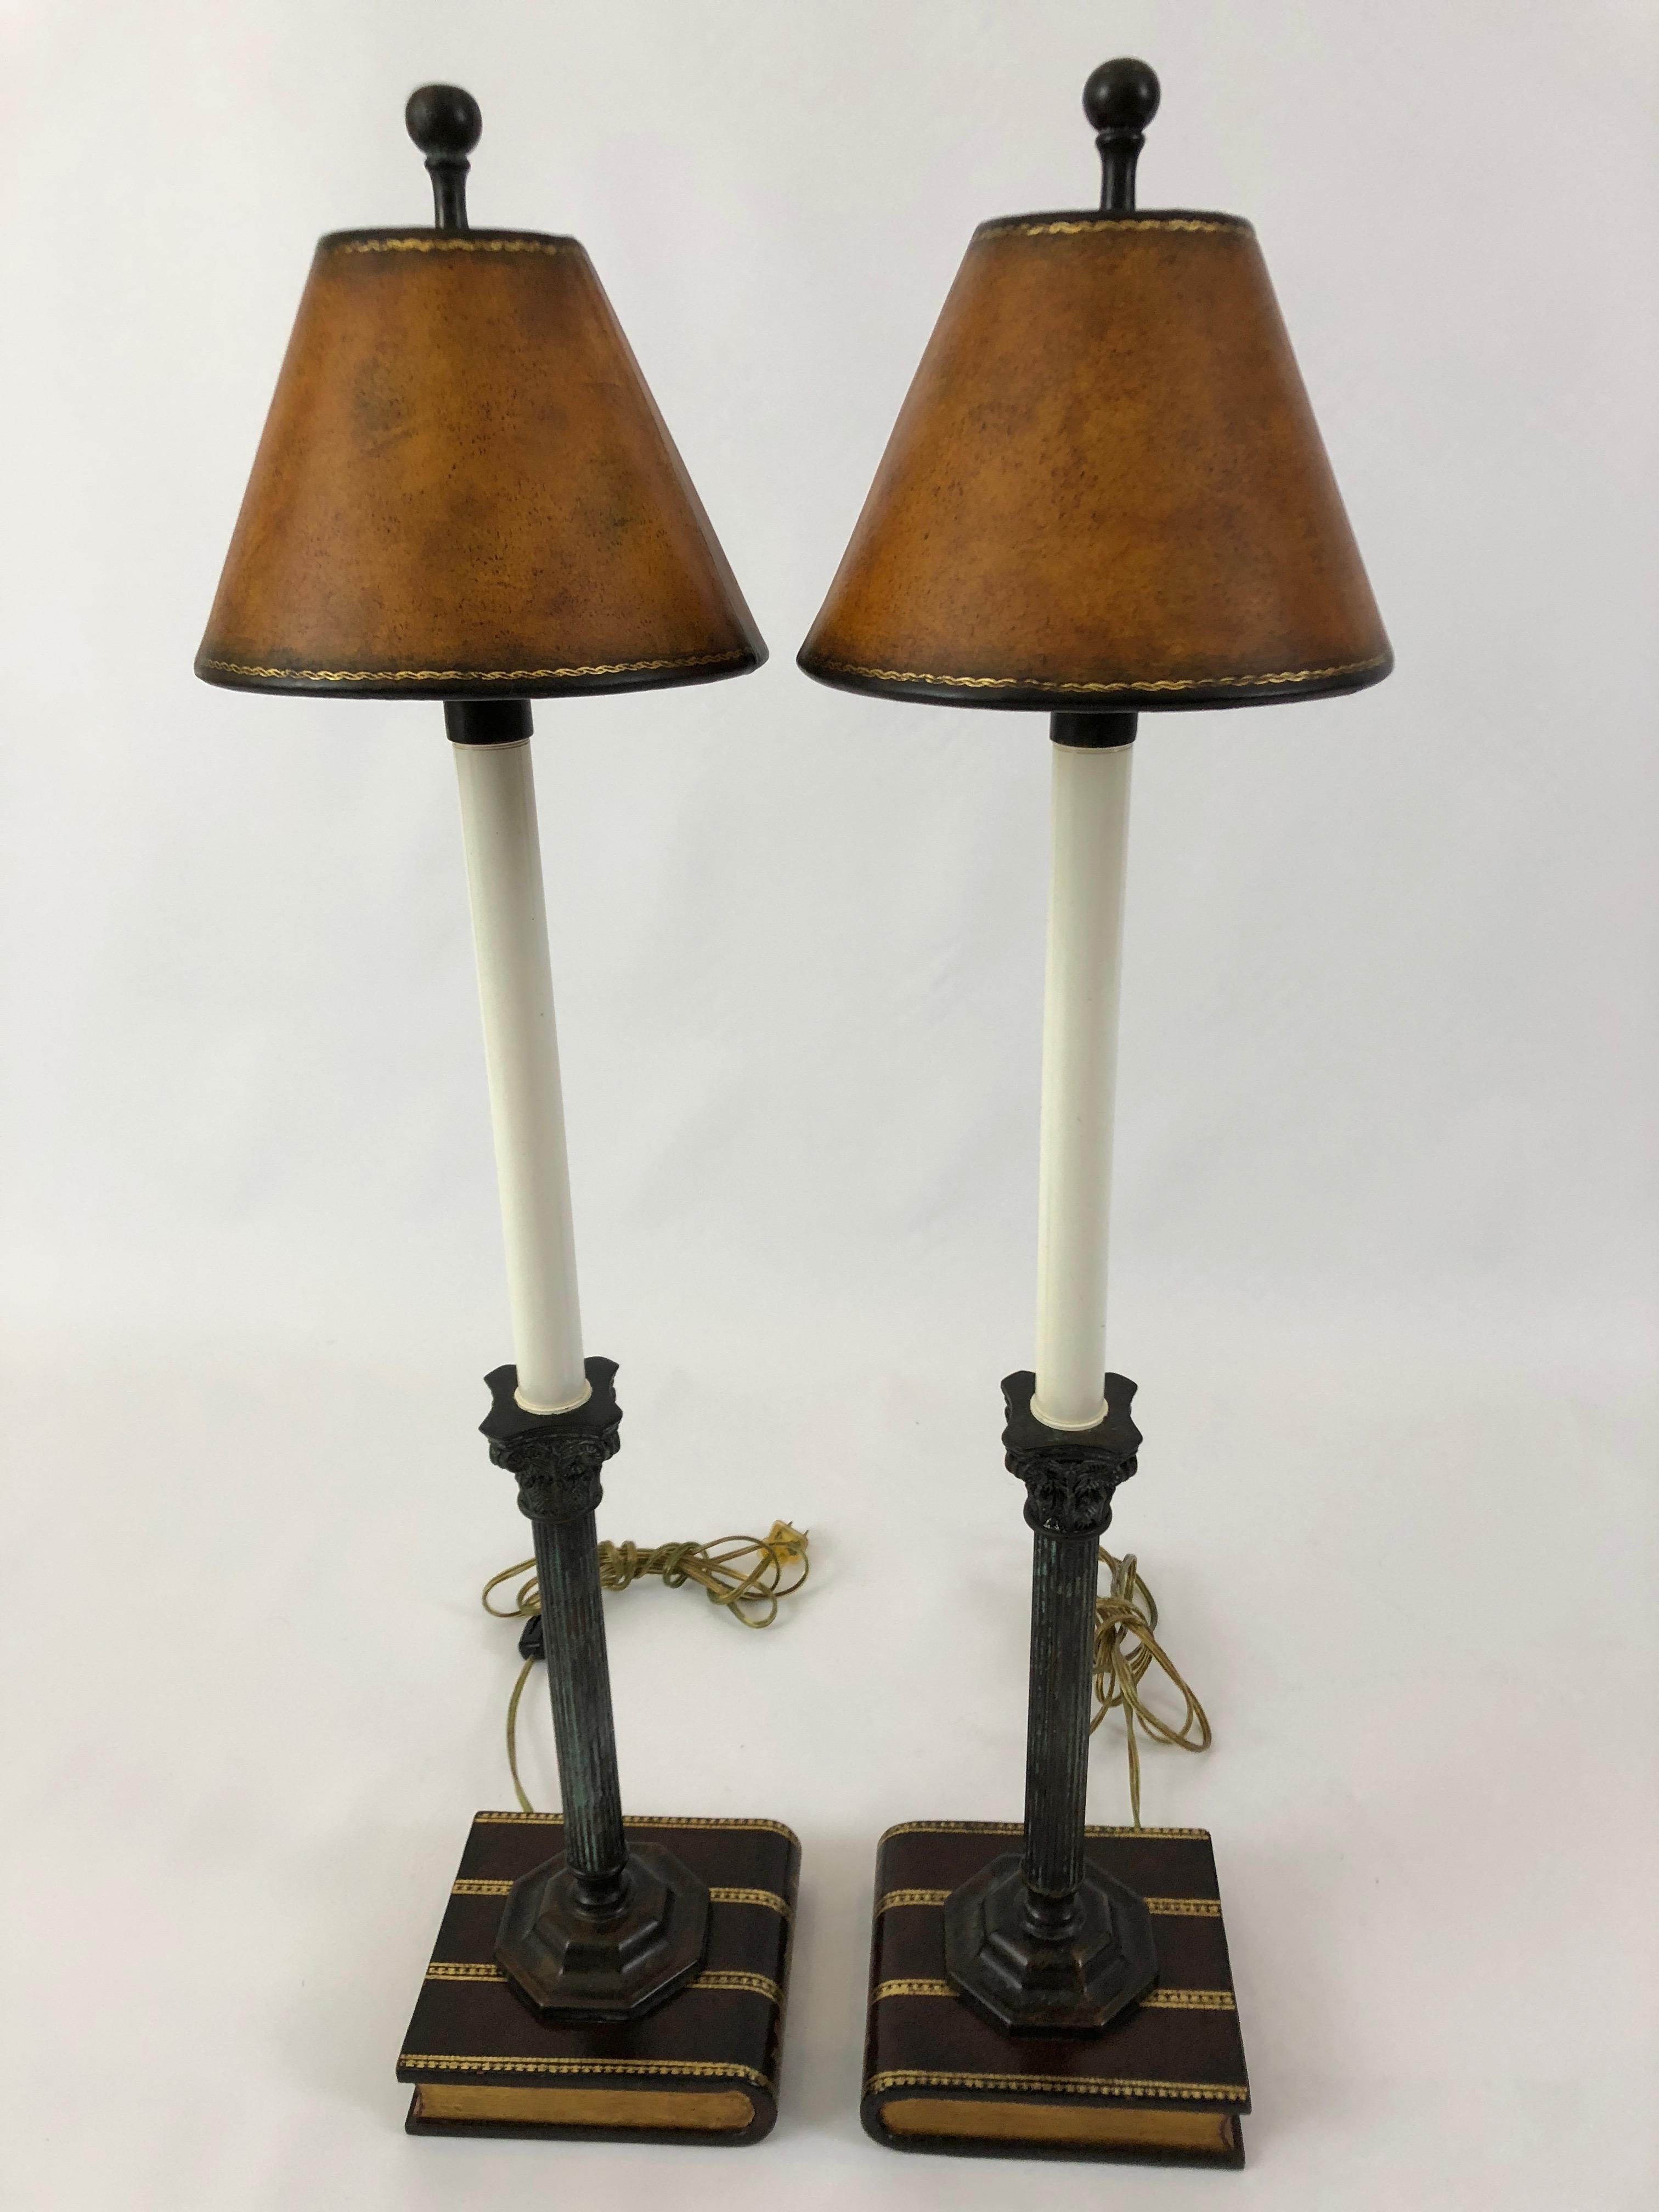 Clever Pair of Maitland-Smith Trompe L'oeil Book and Column Table Lamps (amerikanisch)